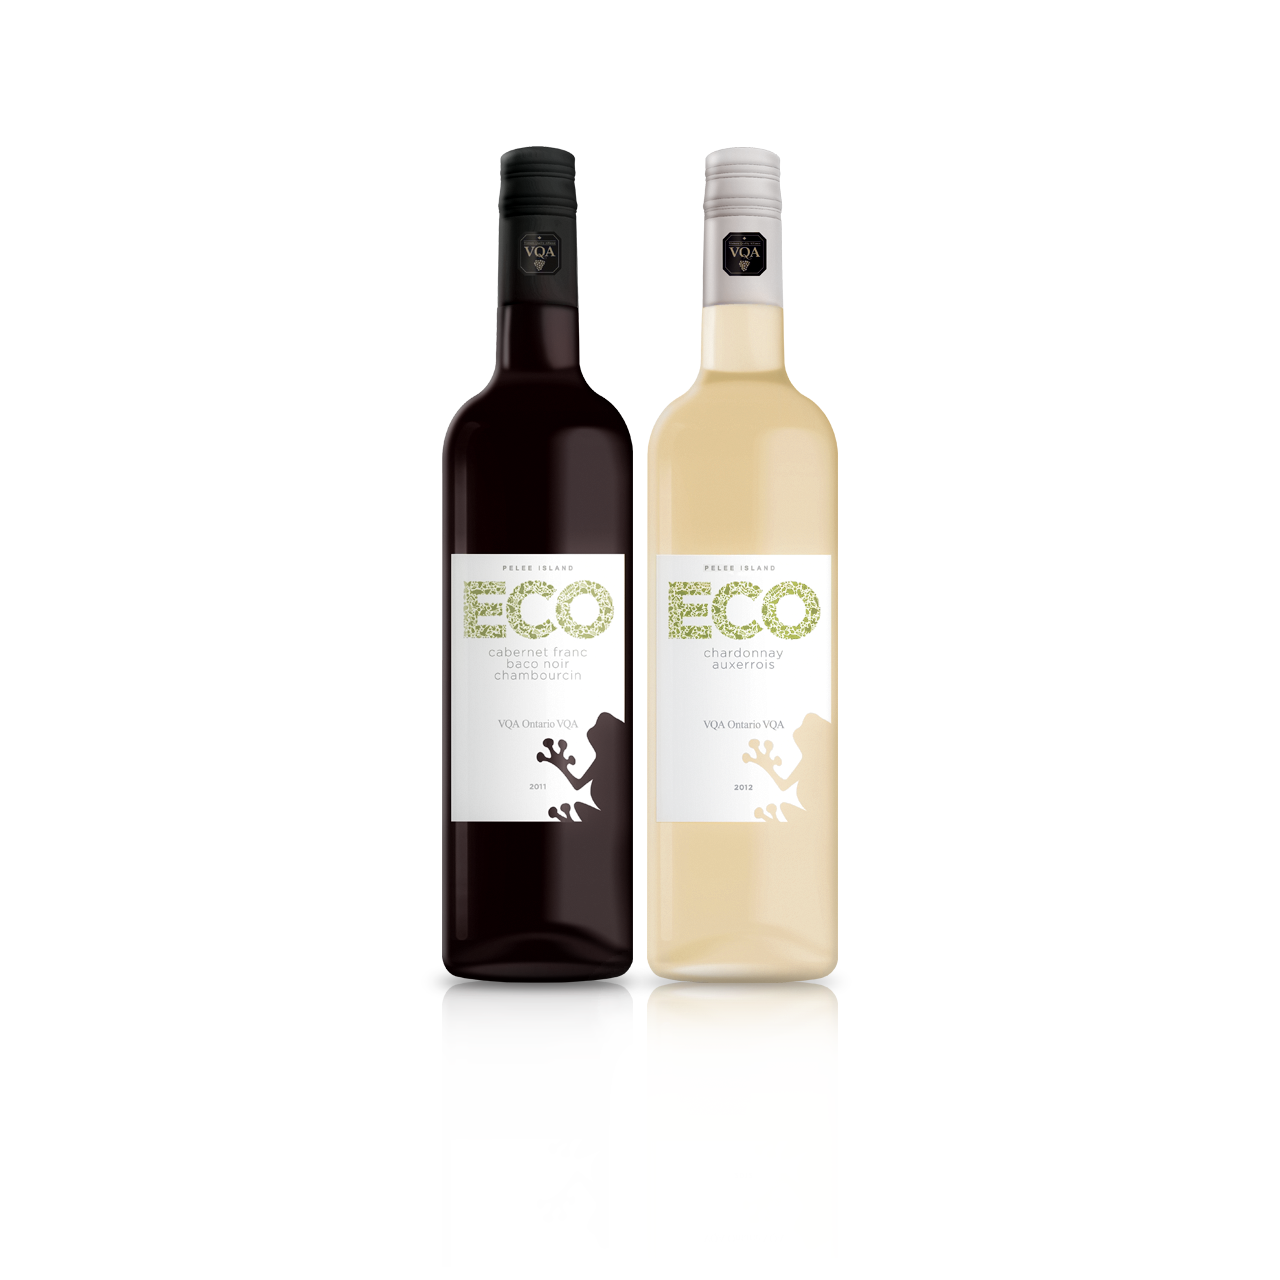 Wine Label Graphic Design ECO wines Peele Island Winery by BANG! creative strategy by design